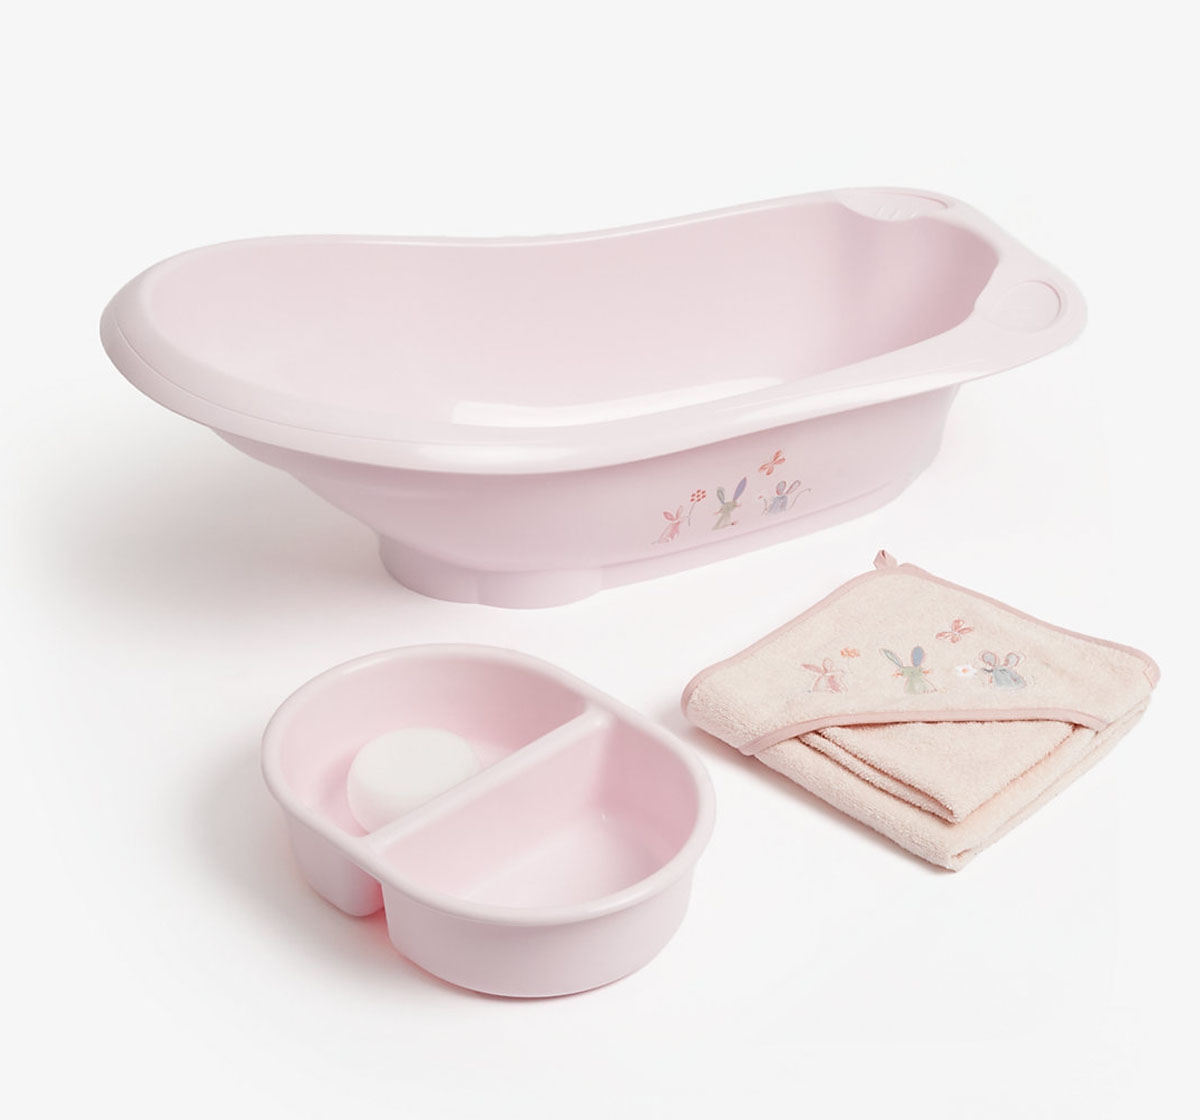 Mothercare | Mothercare Flutterby Bath Set Pink 